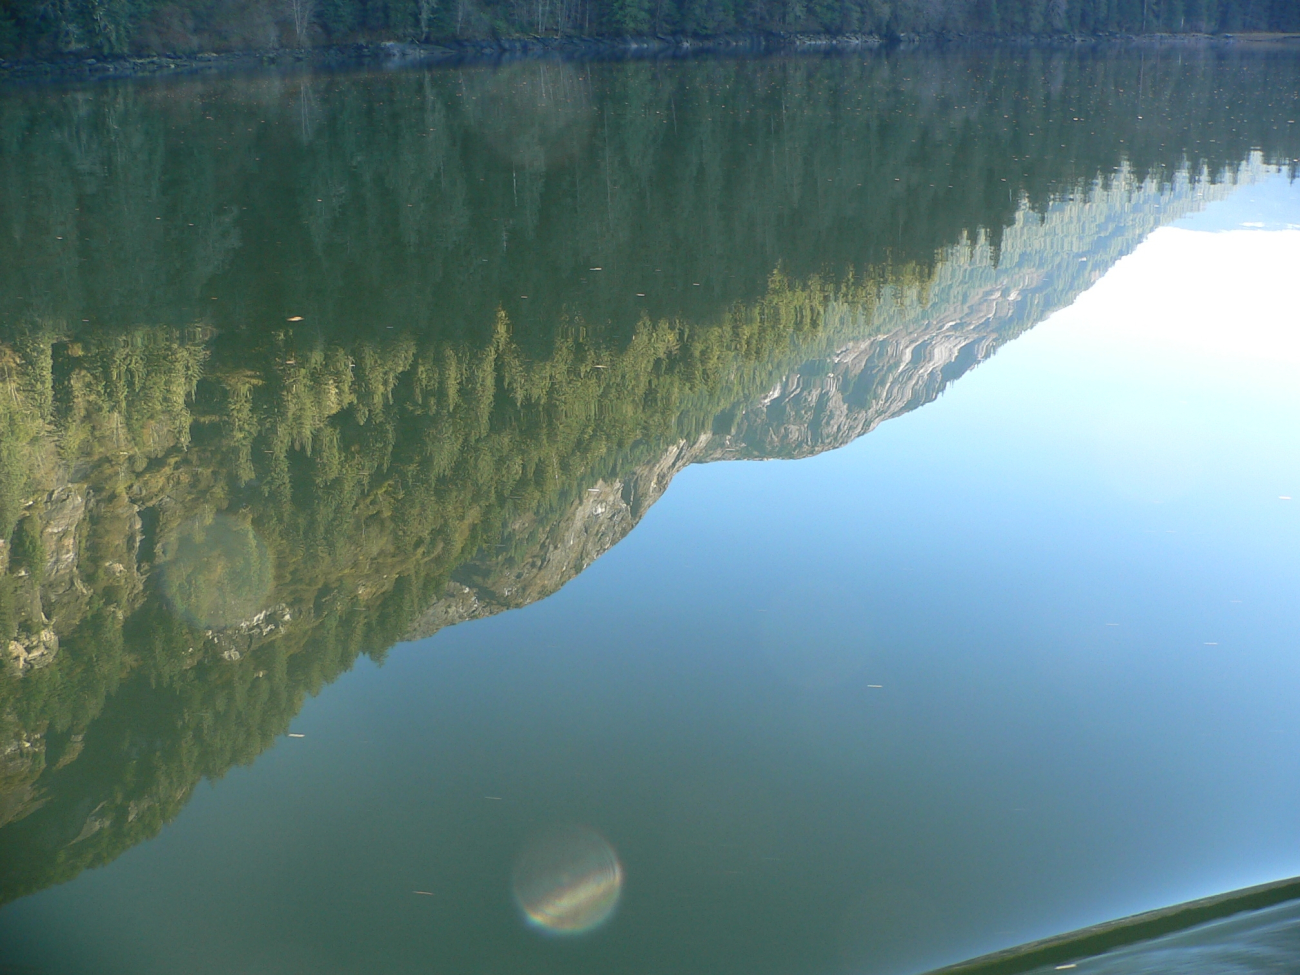 A mirror-like reflection of mountains and trees on a placid inlet